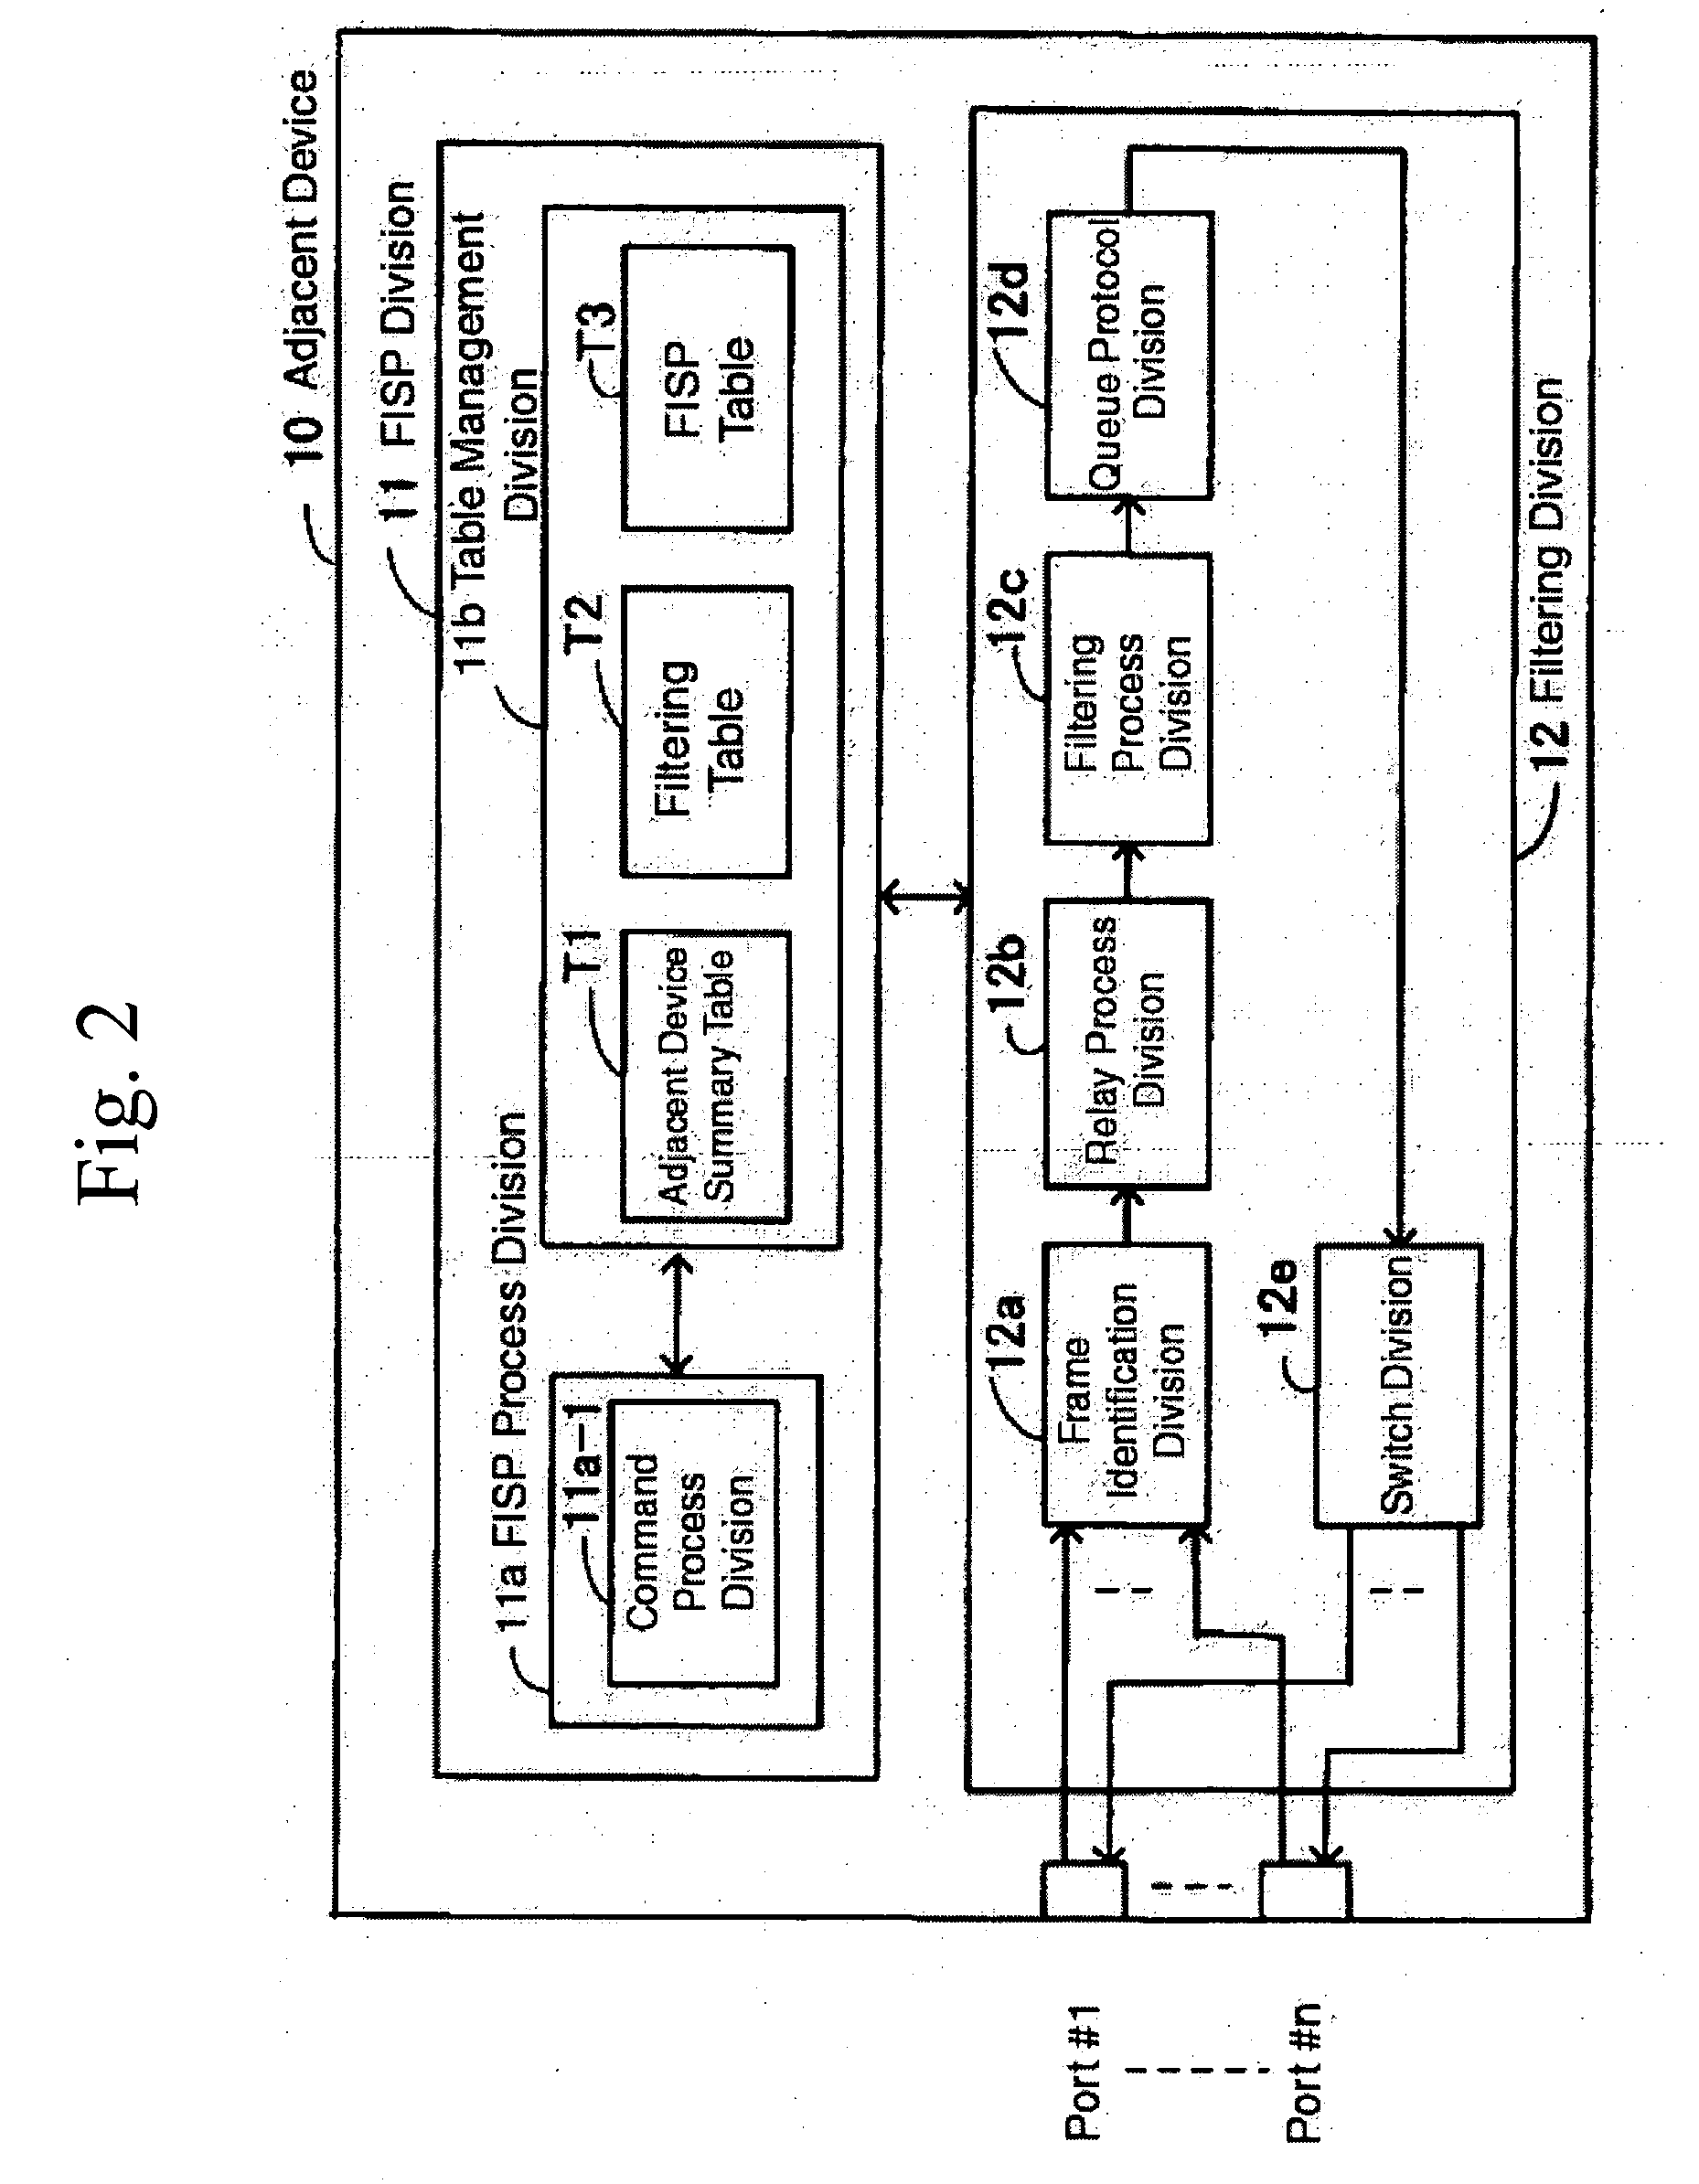 Network system with shared filtering information